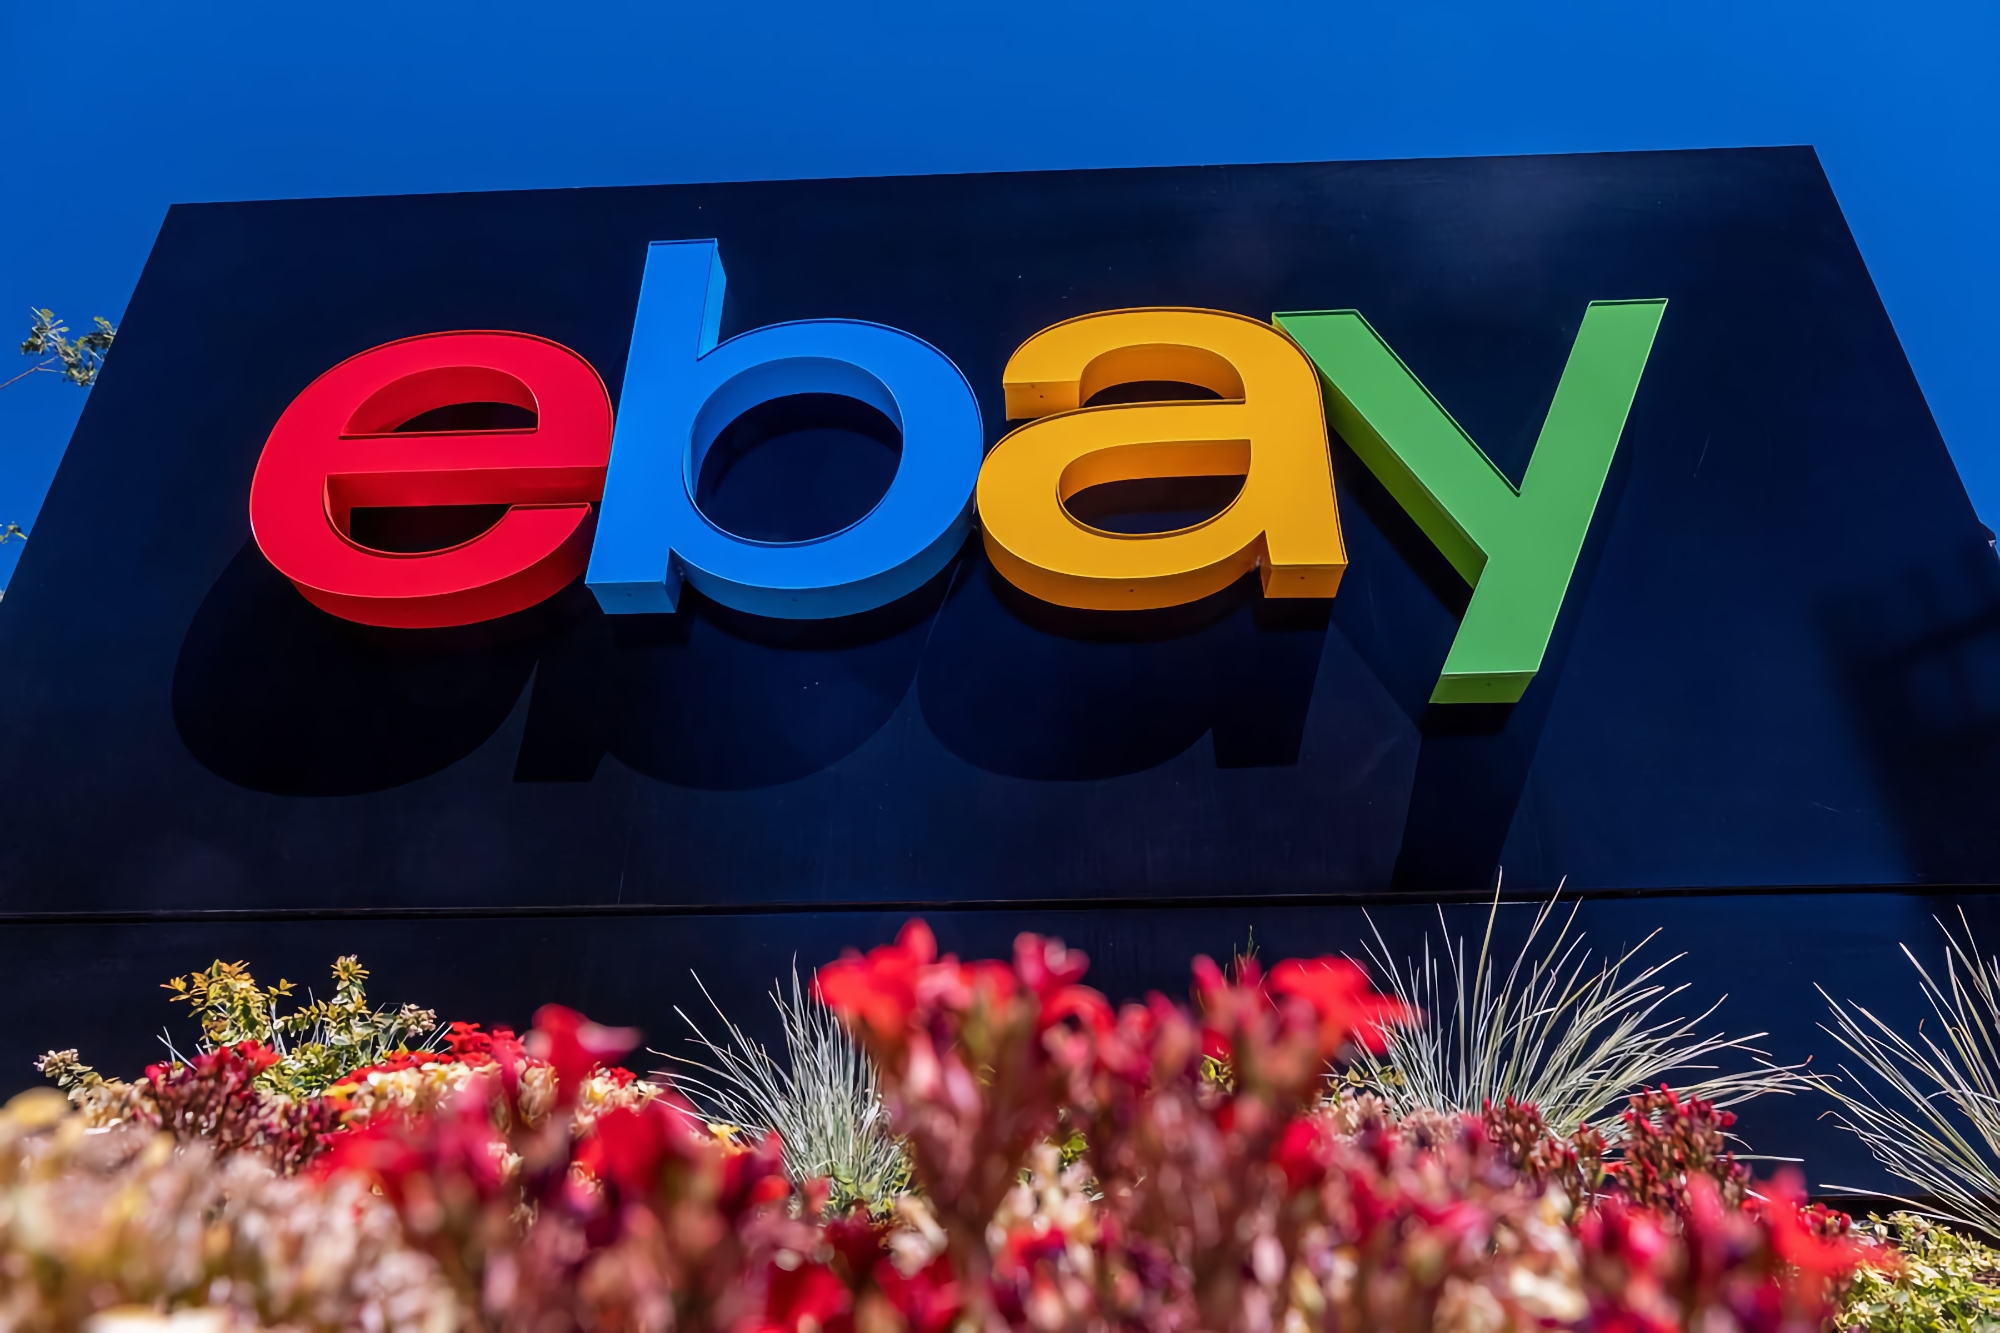 eBay will no longer deliver packages to Russia